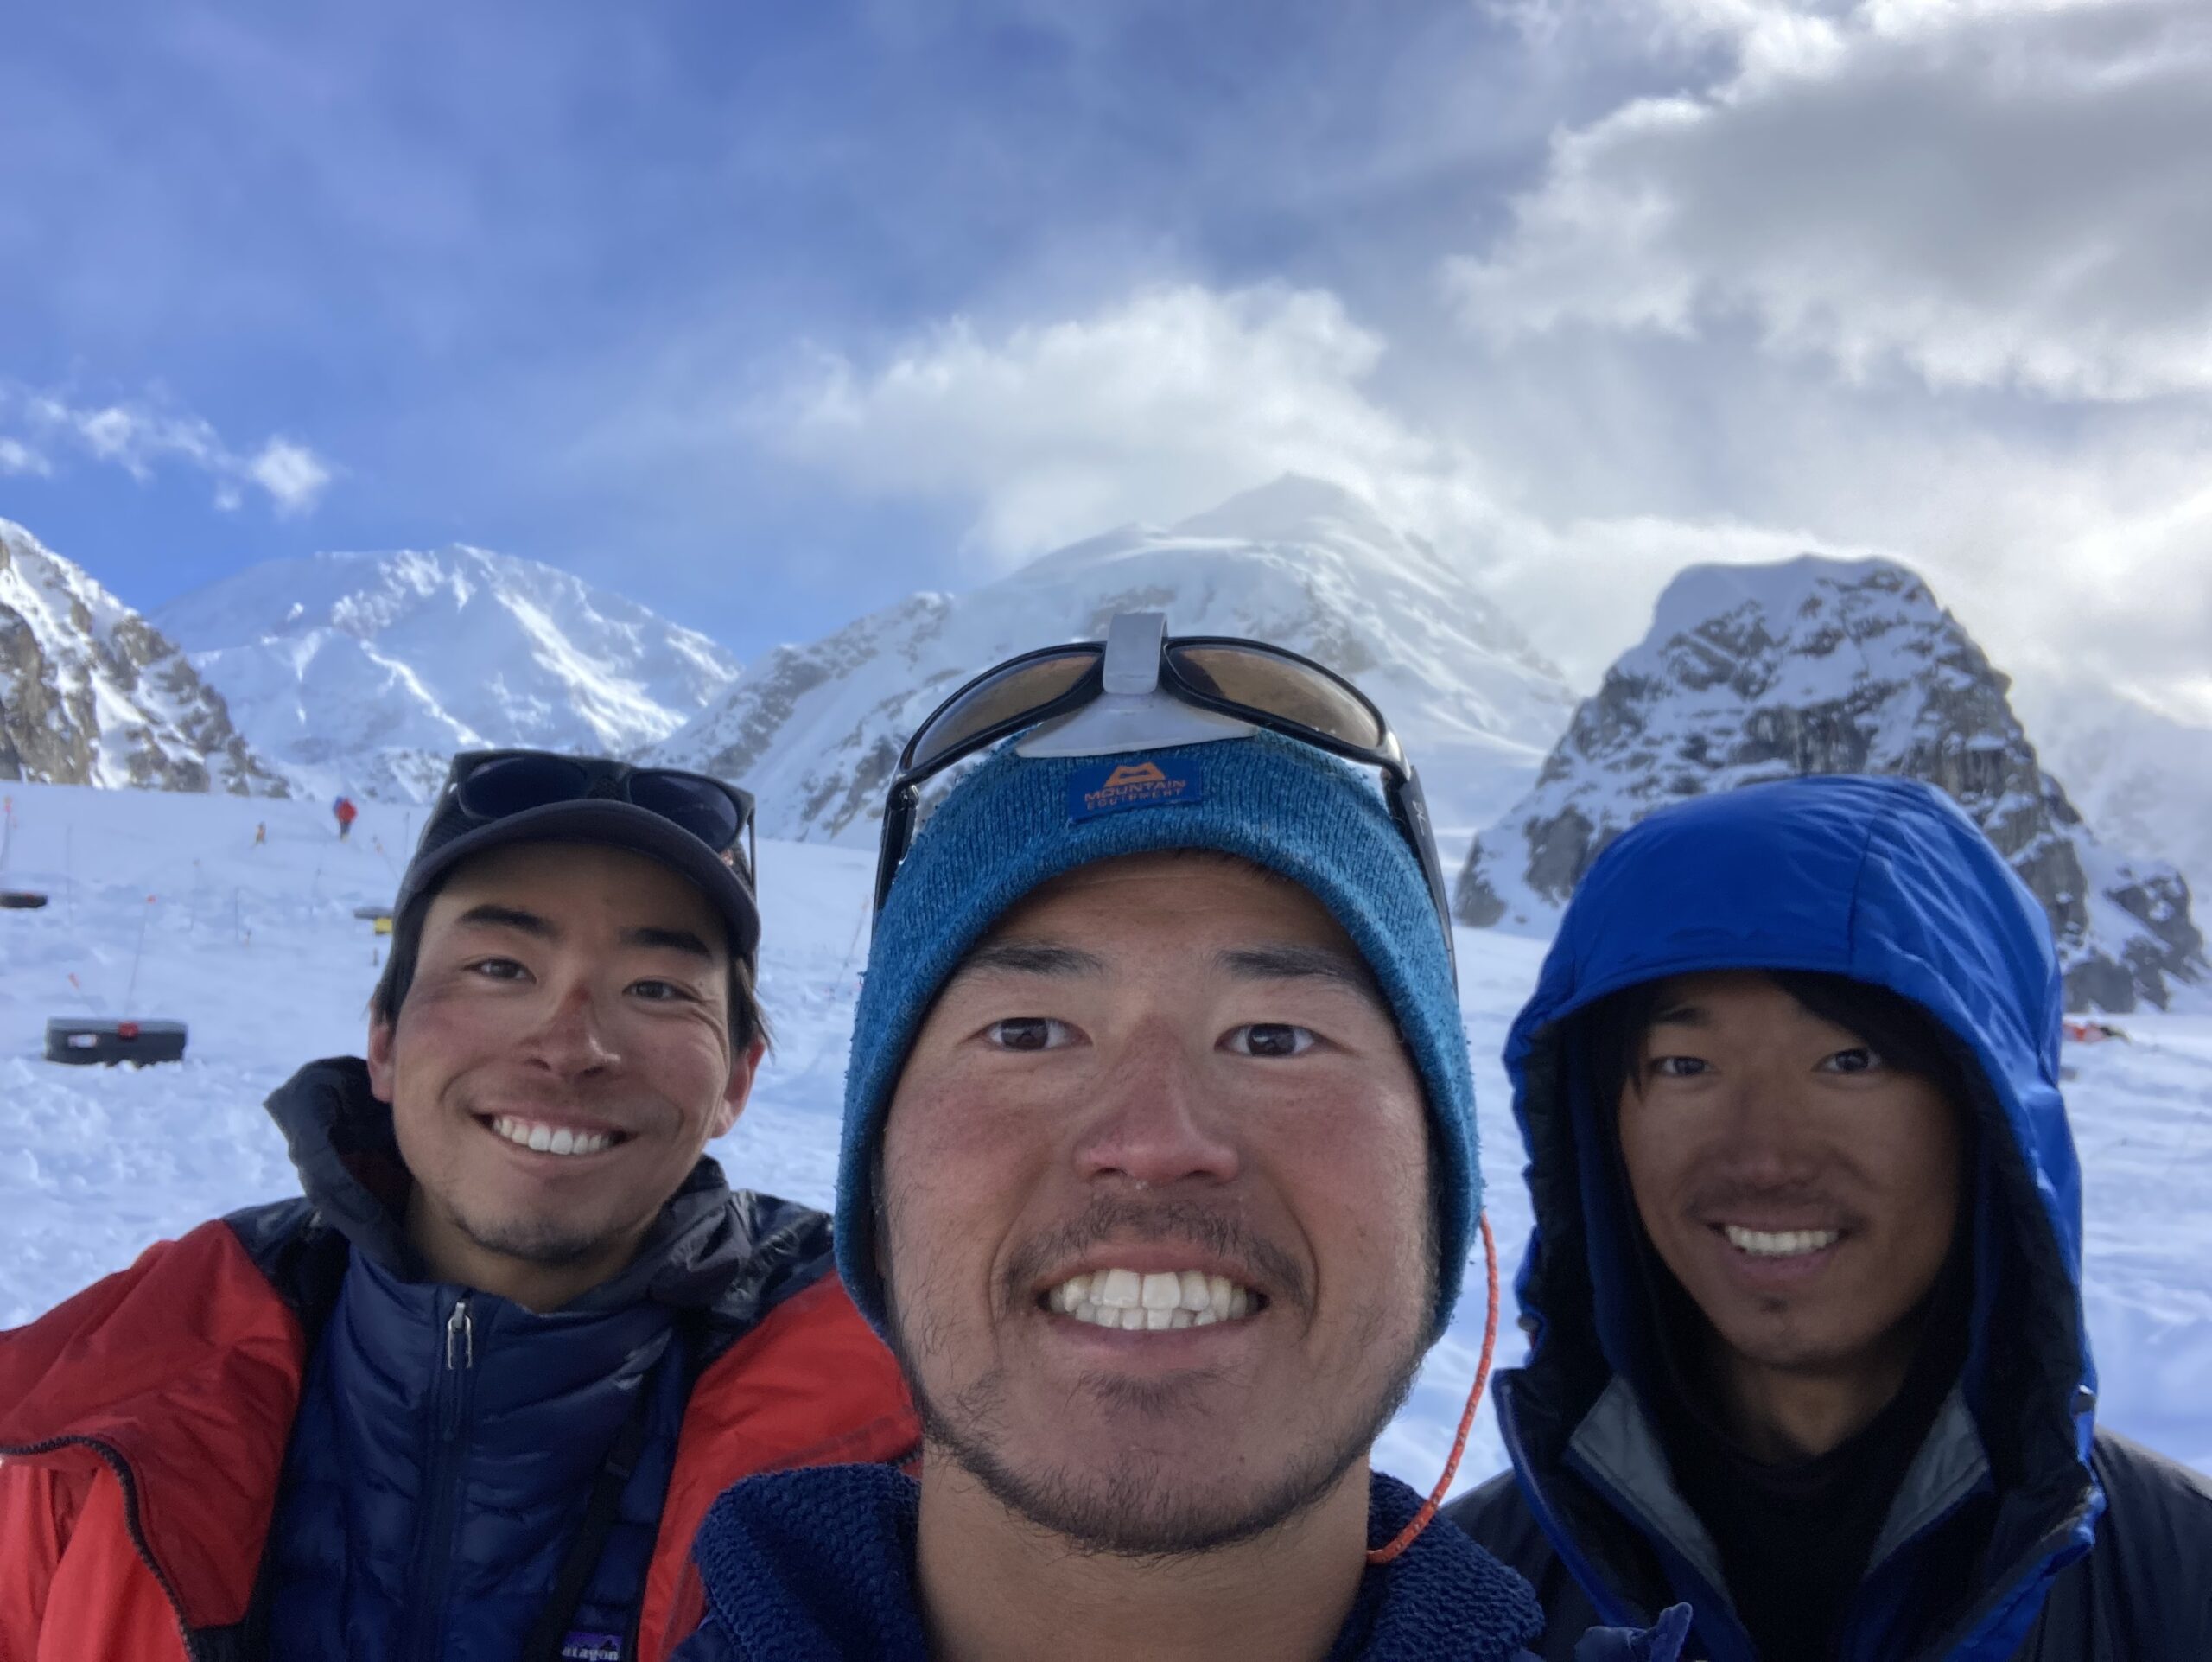 A selfie of three men wearing jackets and hats, surrounded by snow and mountains.